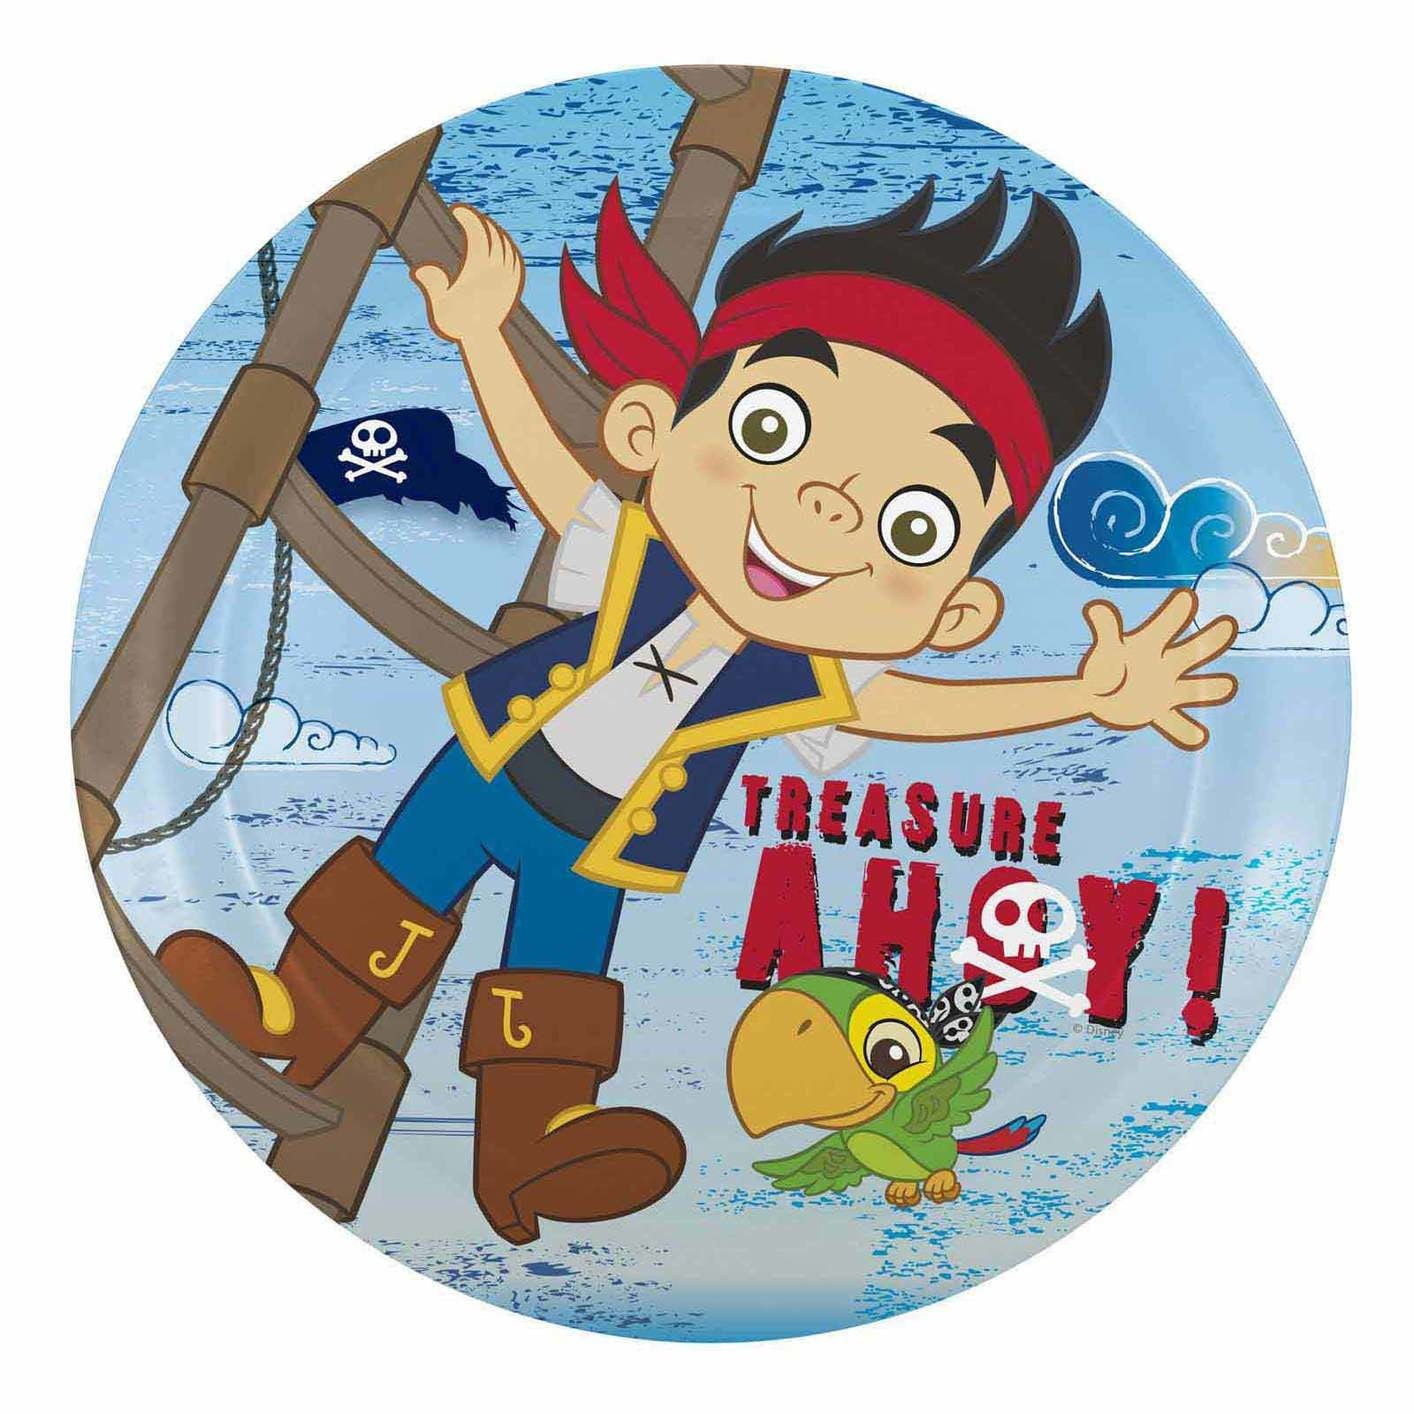 Jake and The Neverland Pirates for sale online Disney Boys Kids Inflatable Pool Arm Floats 